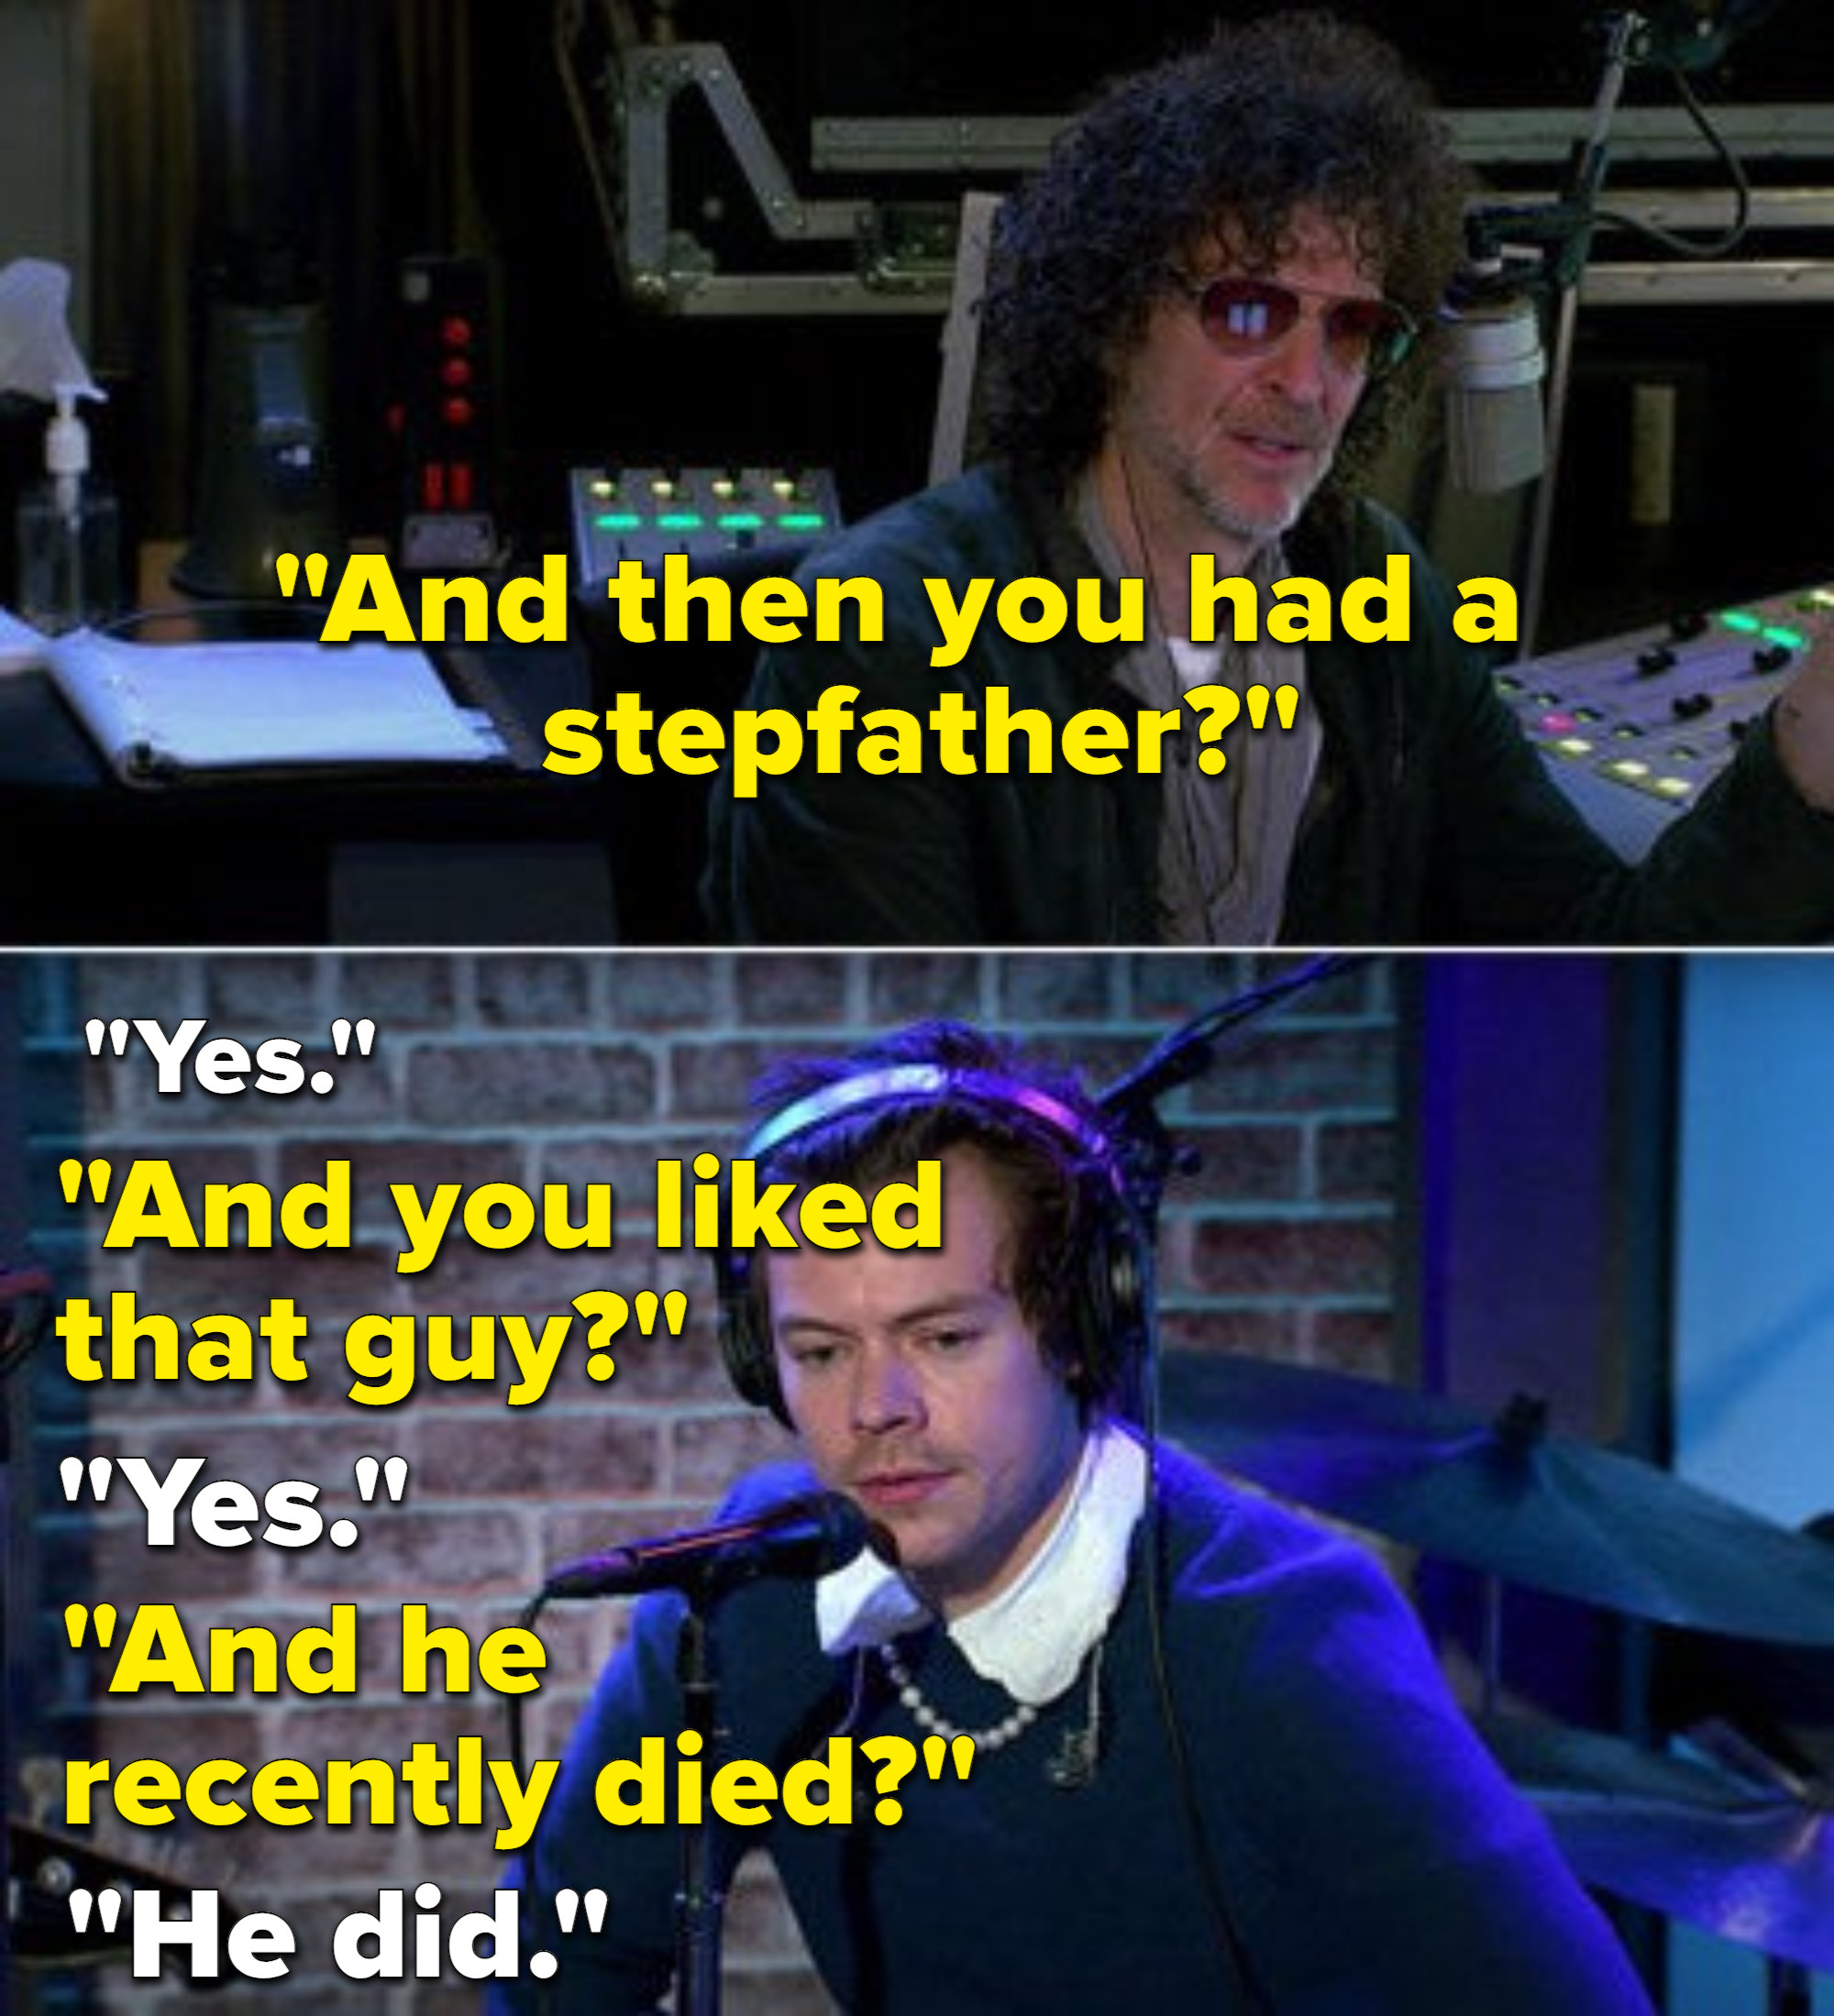 Howard Stern asking questions about Harry&#x27;s relationship to his father and dead stepfather